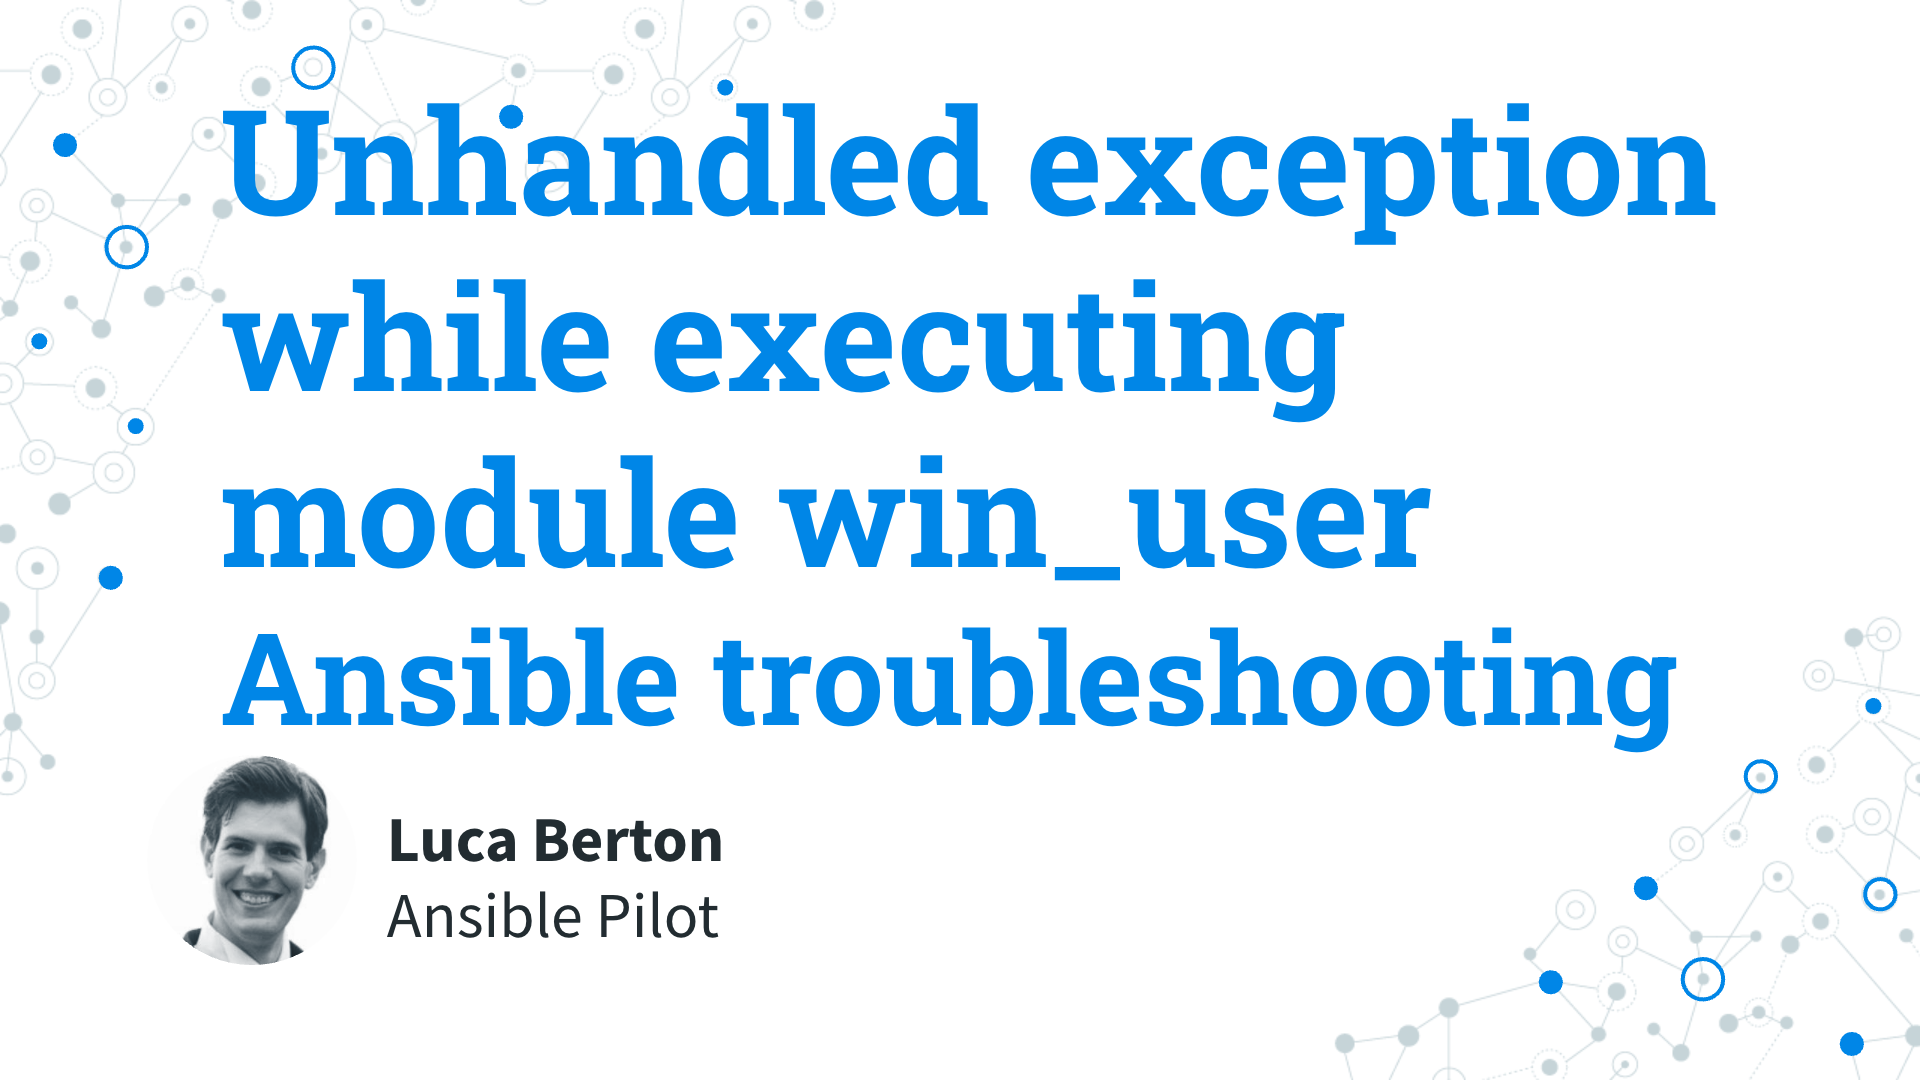 Ansible troubleshooting - Unhandled exception while executing module win_user